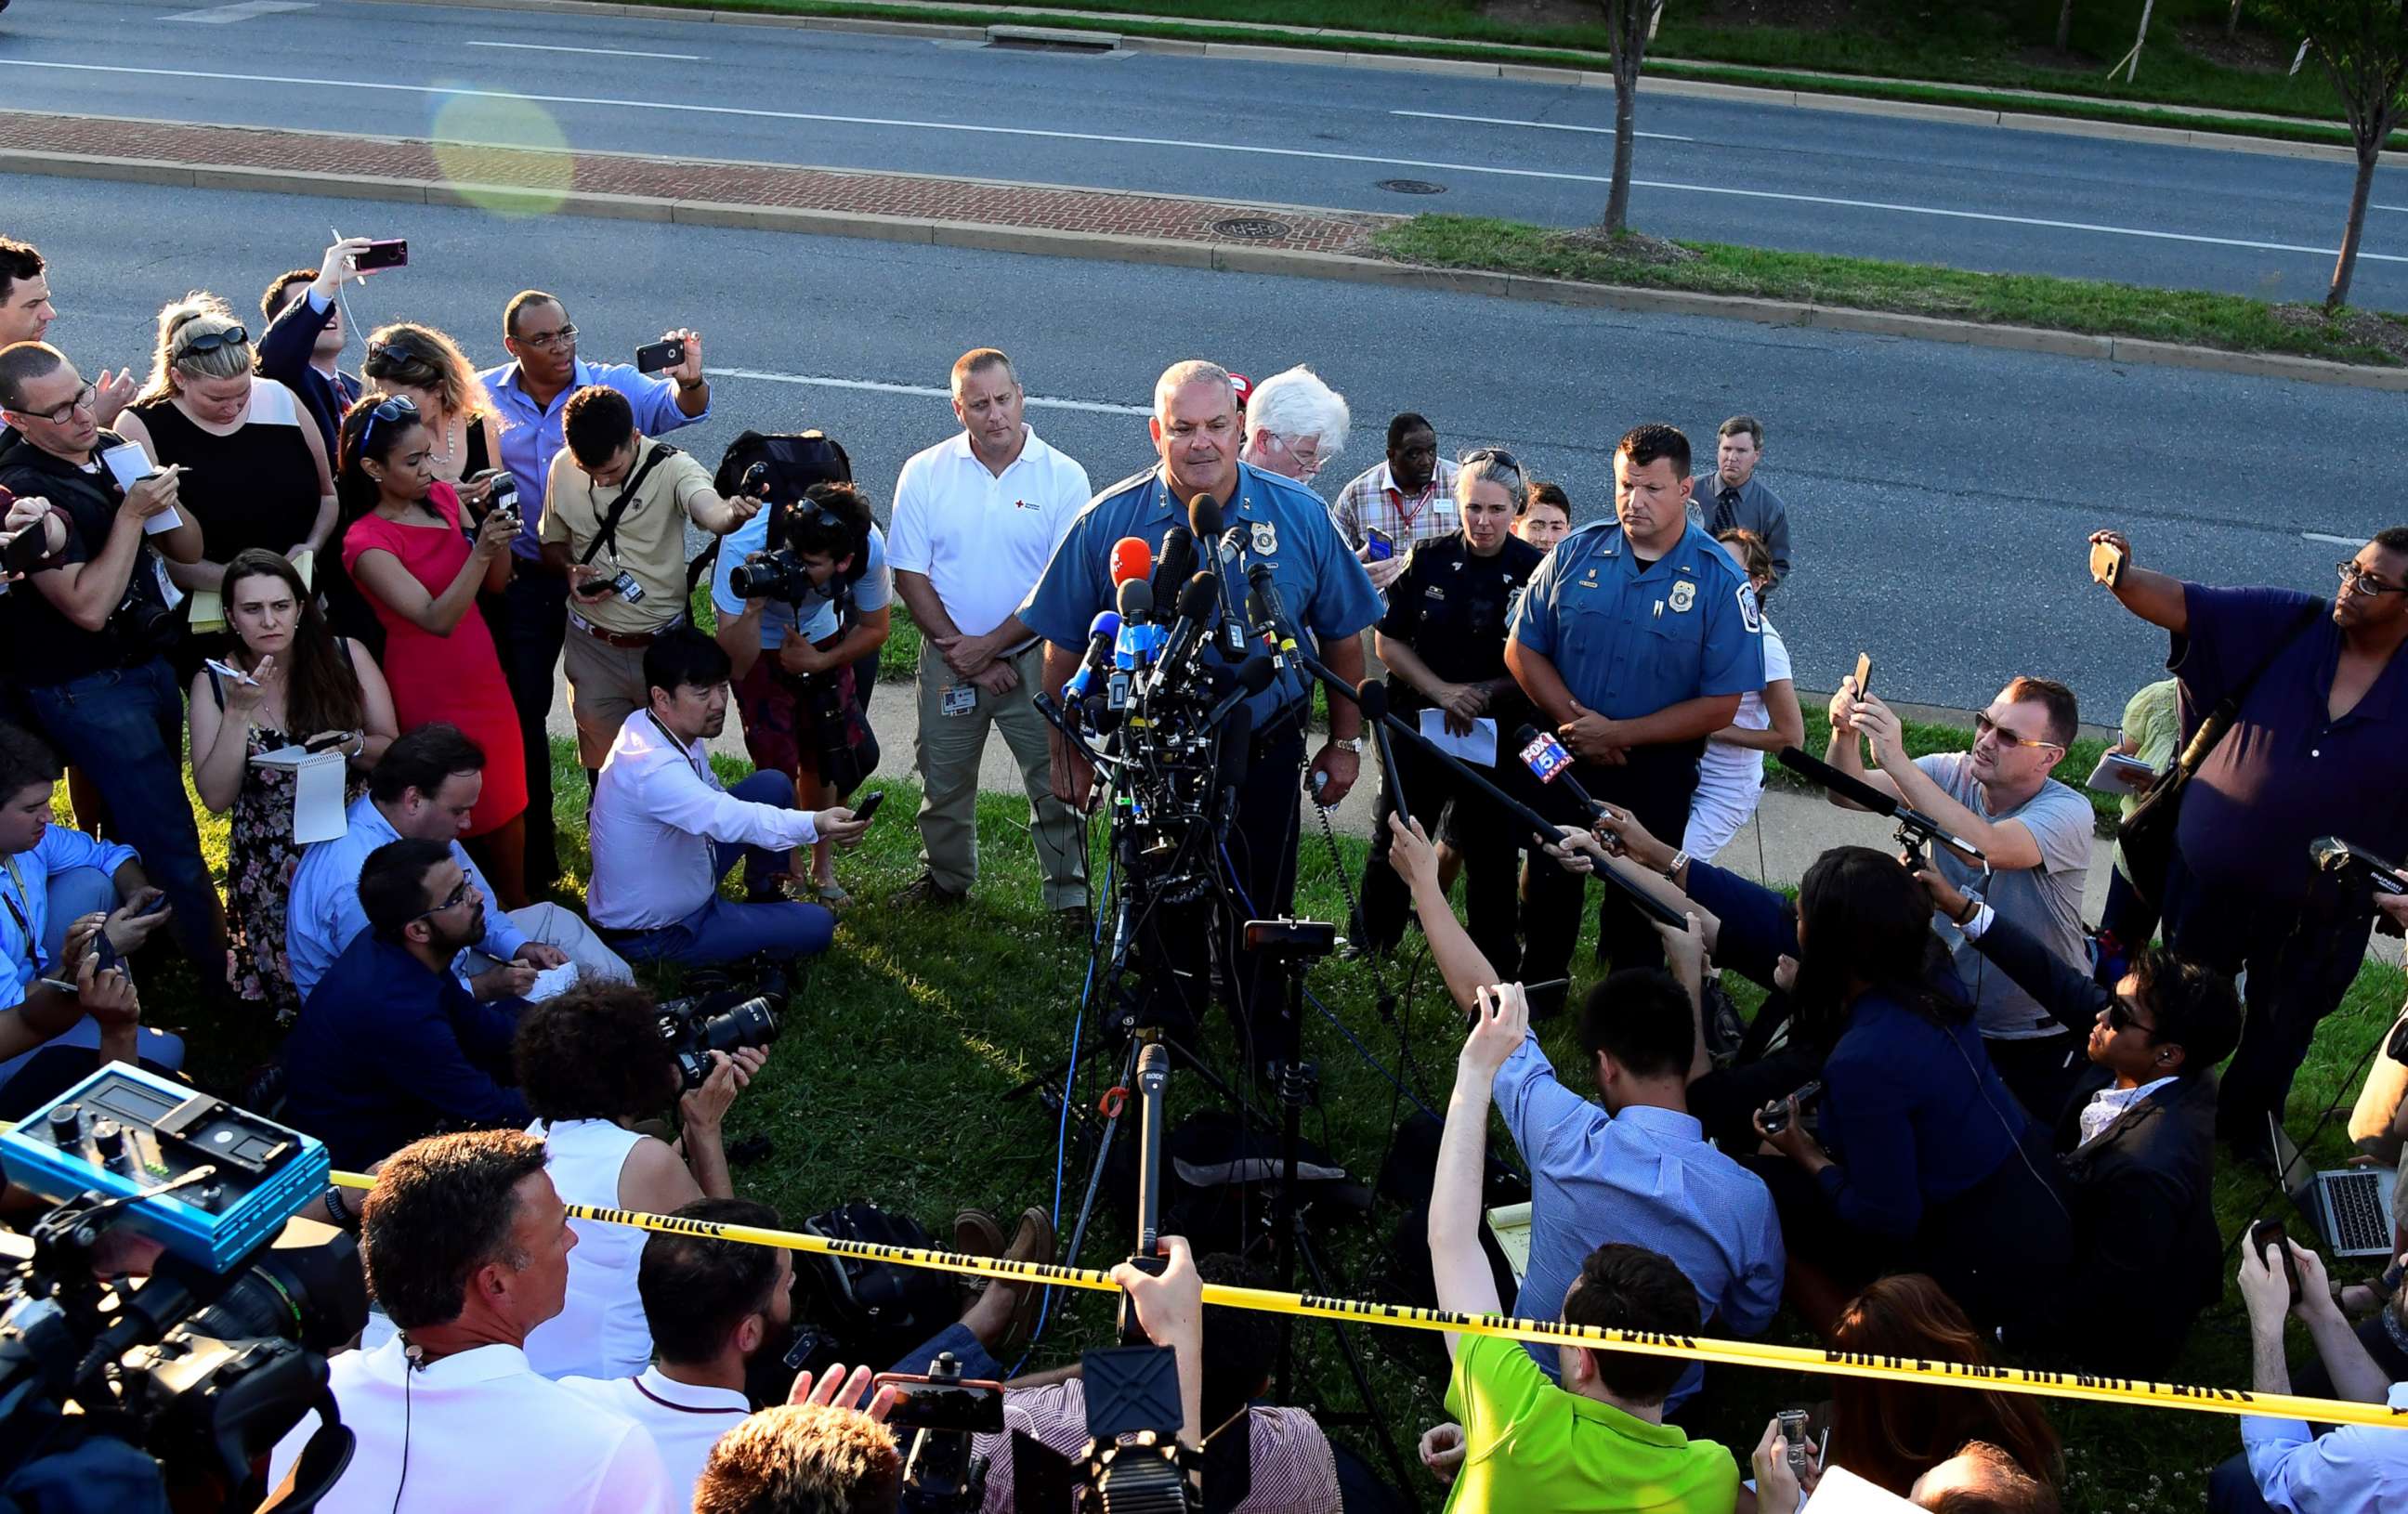 PHOTO: A police officer speaks to the media near the scene of a mass shooting in Annapolis, Maryland, June 28, 2018.